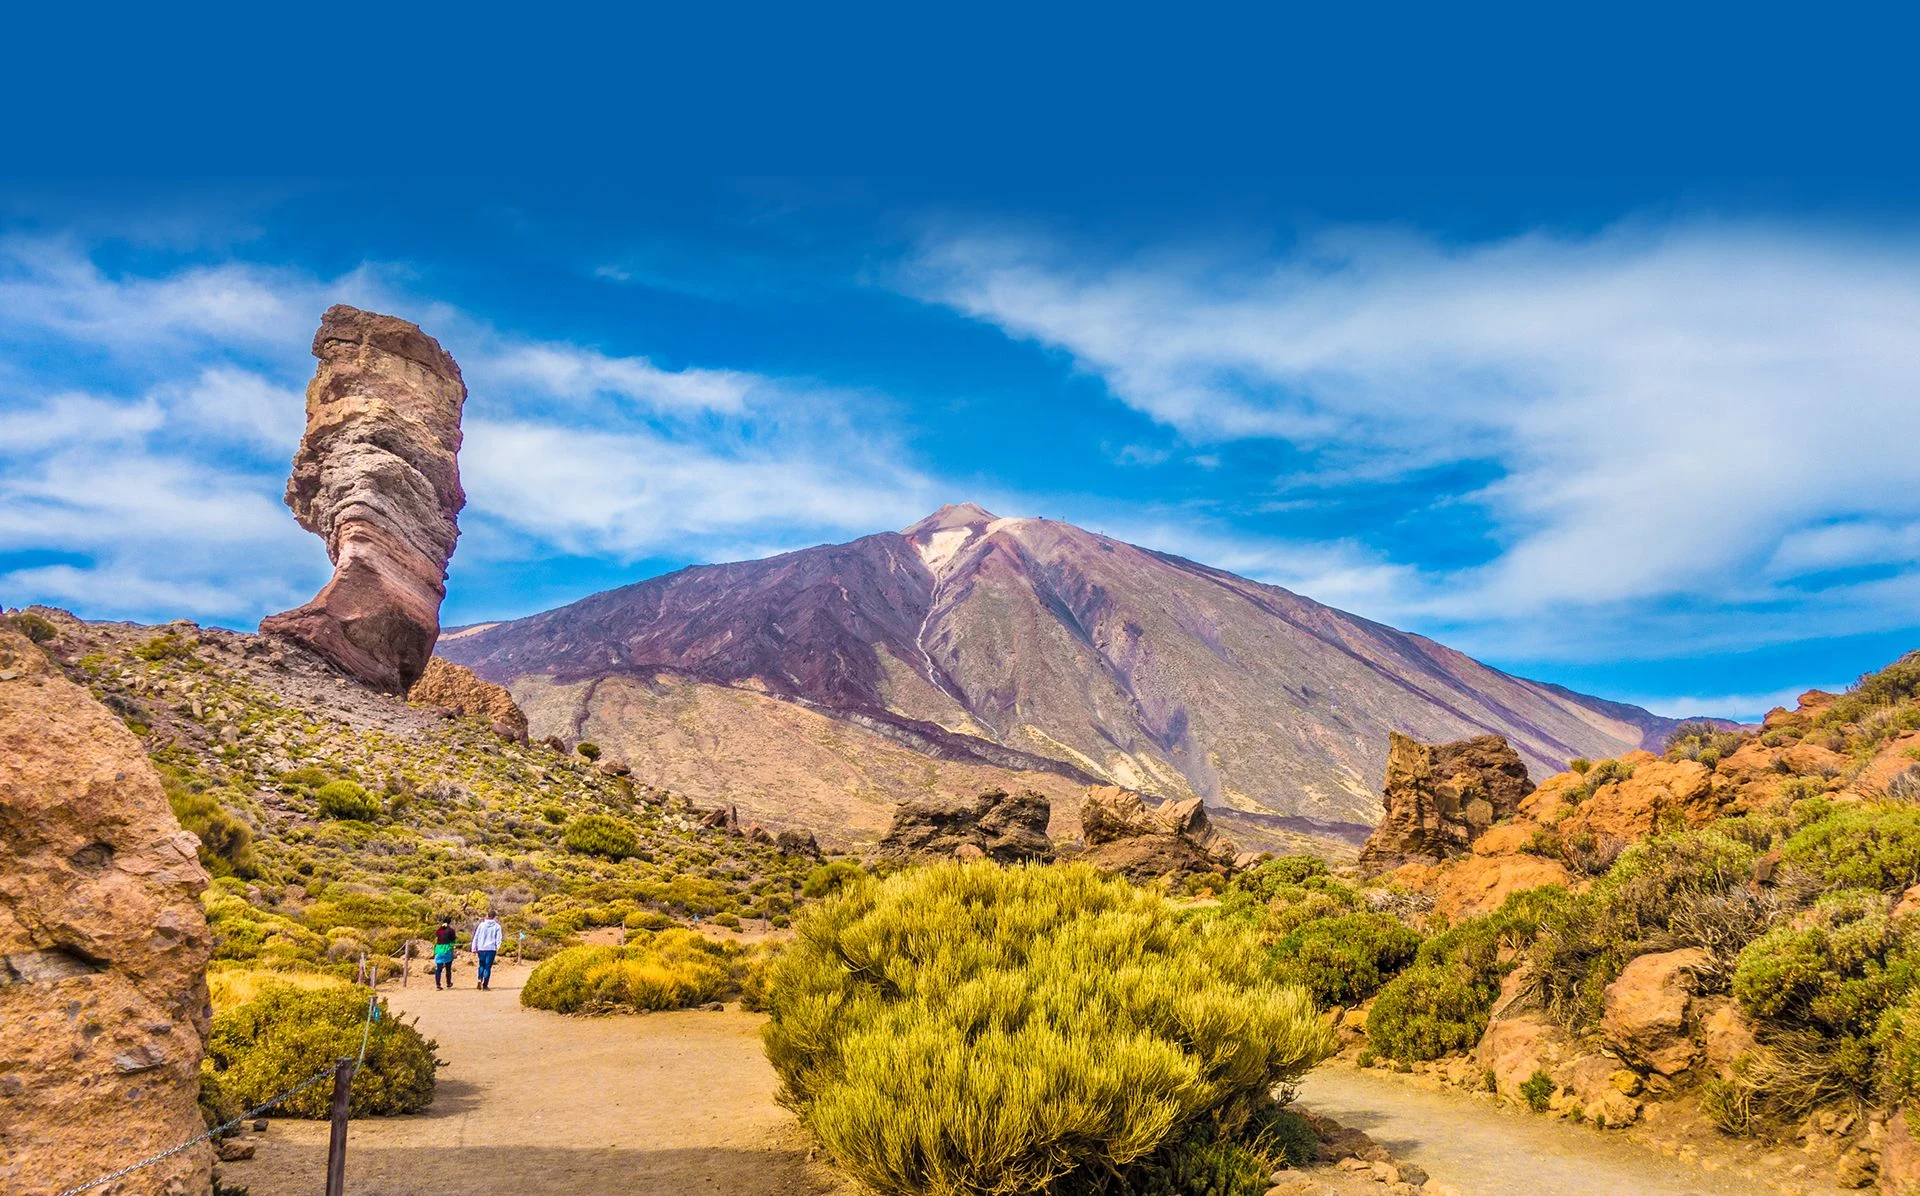 The 'God's finger' rock formation is an imposing sight in front of Mount Teide in the Canary Islands. Photo: Shutterstock